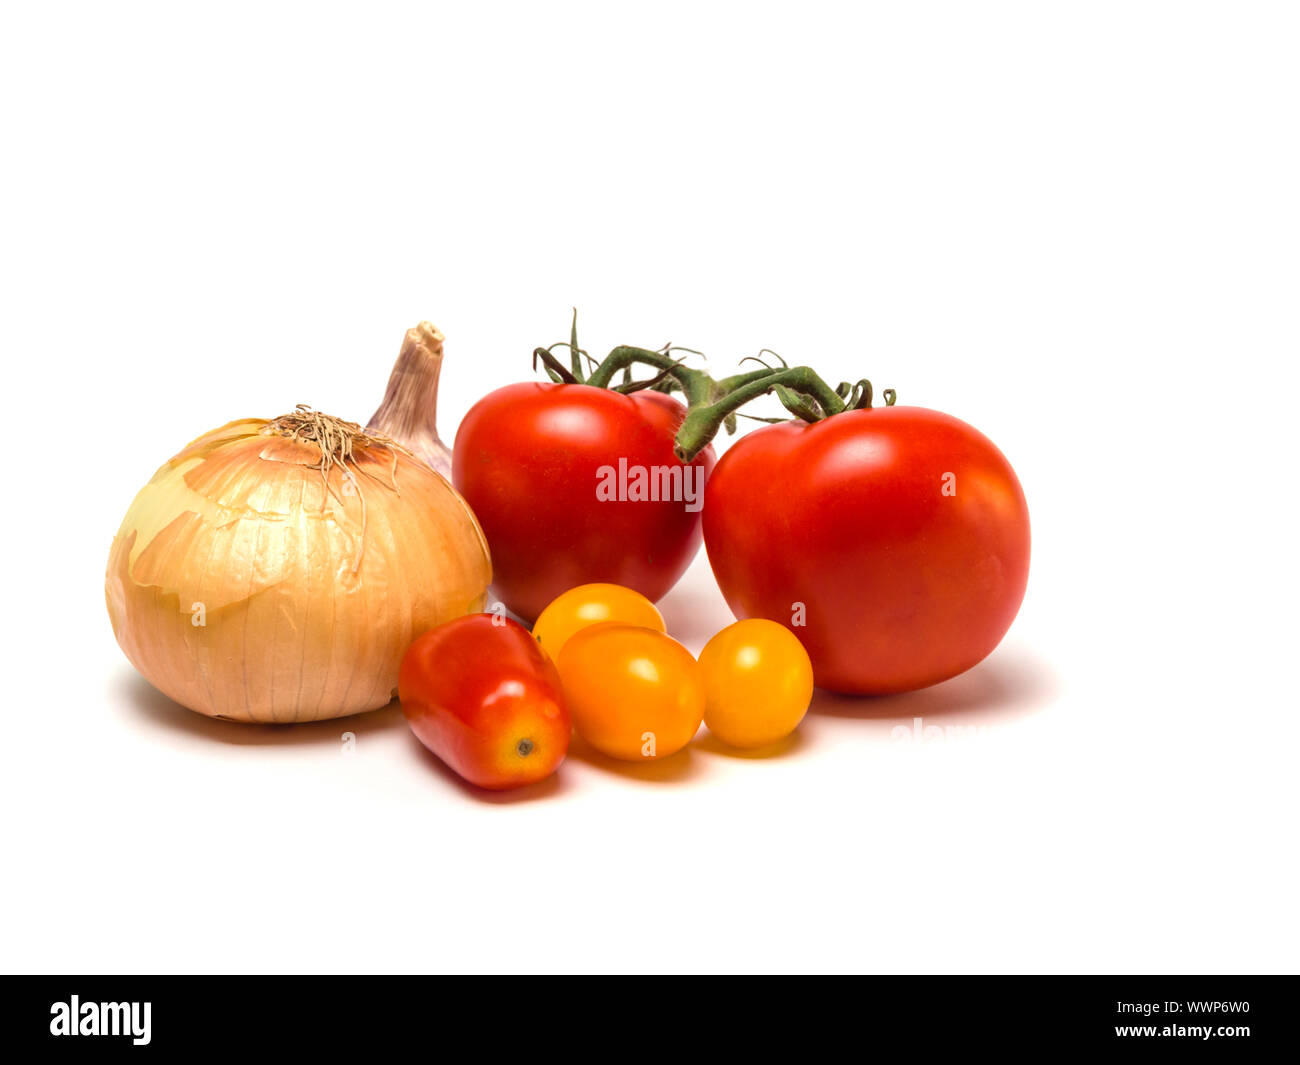 Group of tomatoes of different color and size and an onion an agarlic in the back isolated on white background. Selective focus. Stock Photo